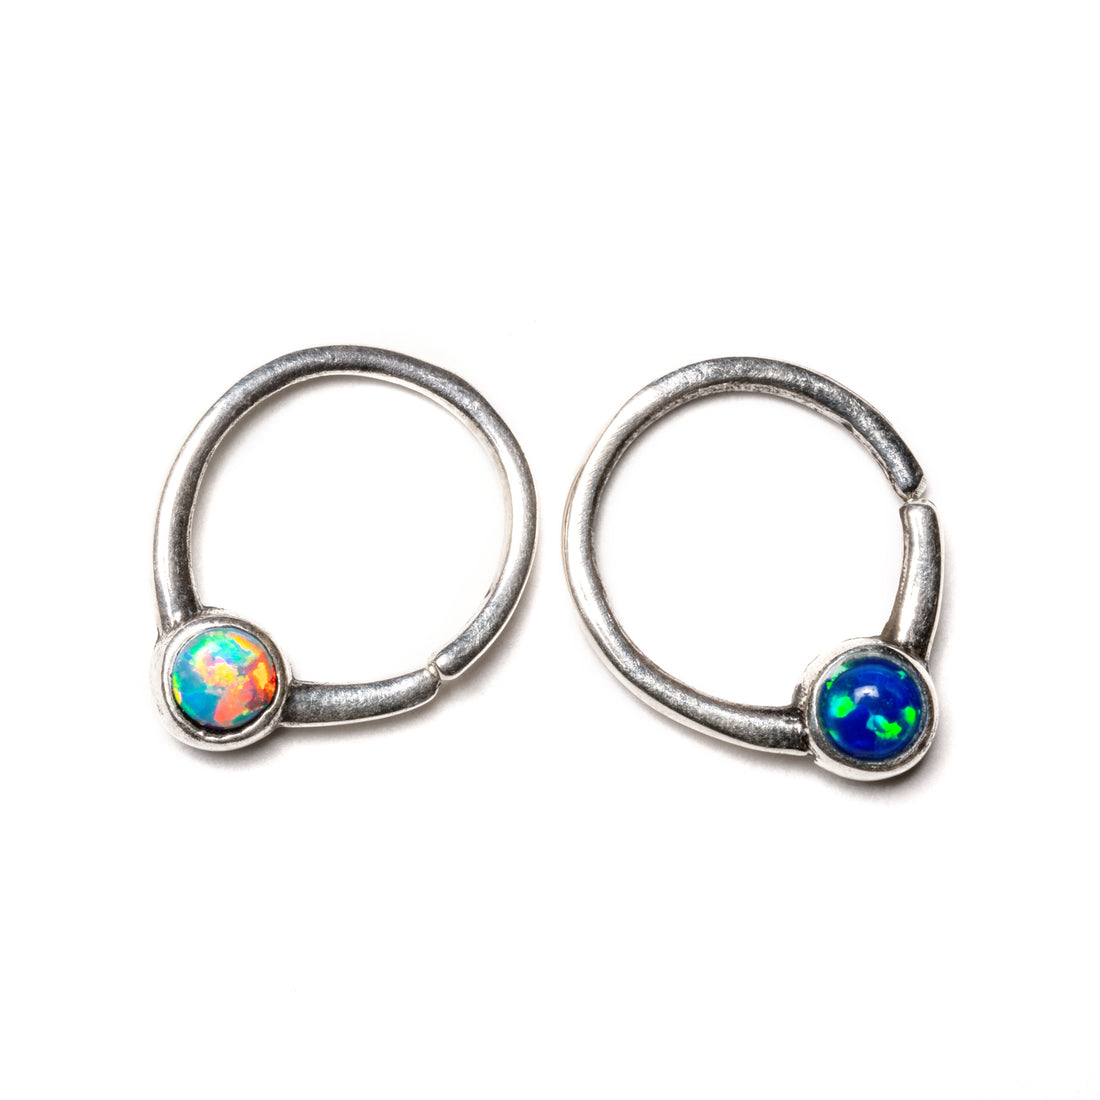 Devika silver septum ring with white and blue Opals frontal view